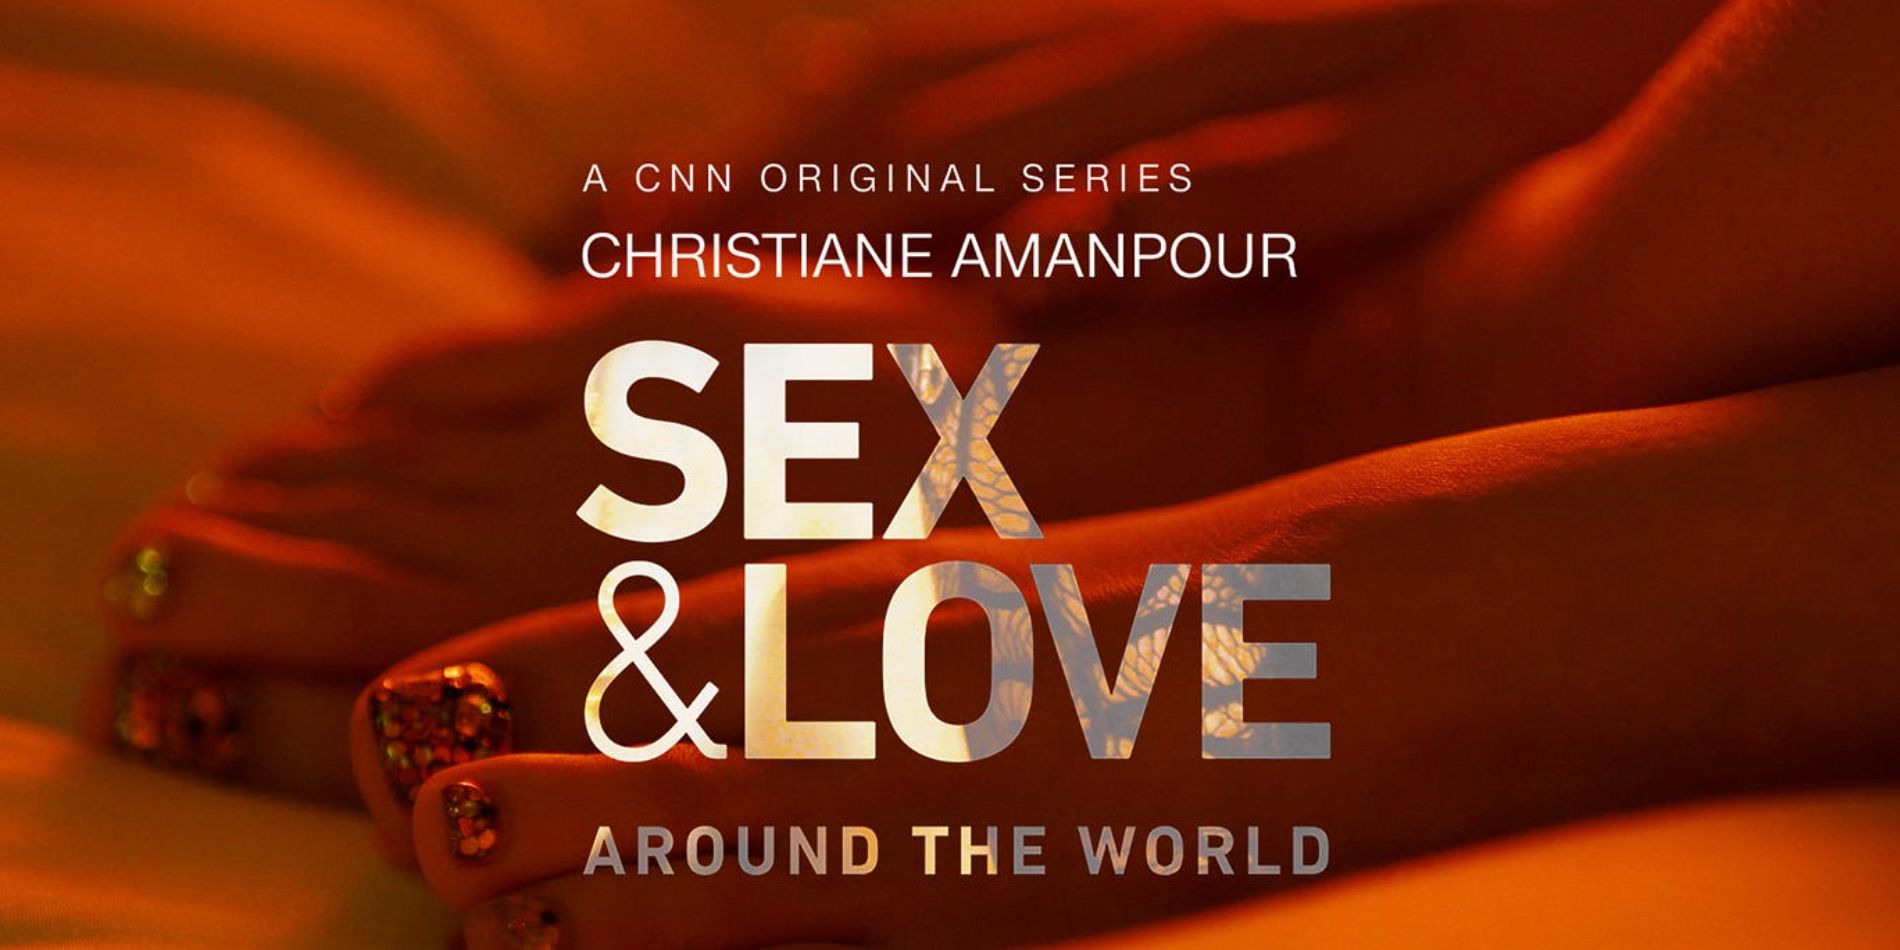 The title card for Sex and Love Around The World features orange and red color tones with the white letters of the title over a pair of feet with glittering nail polish